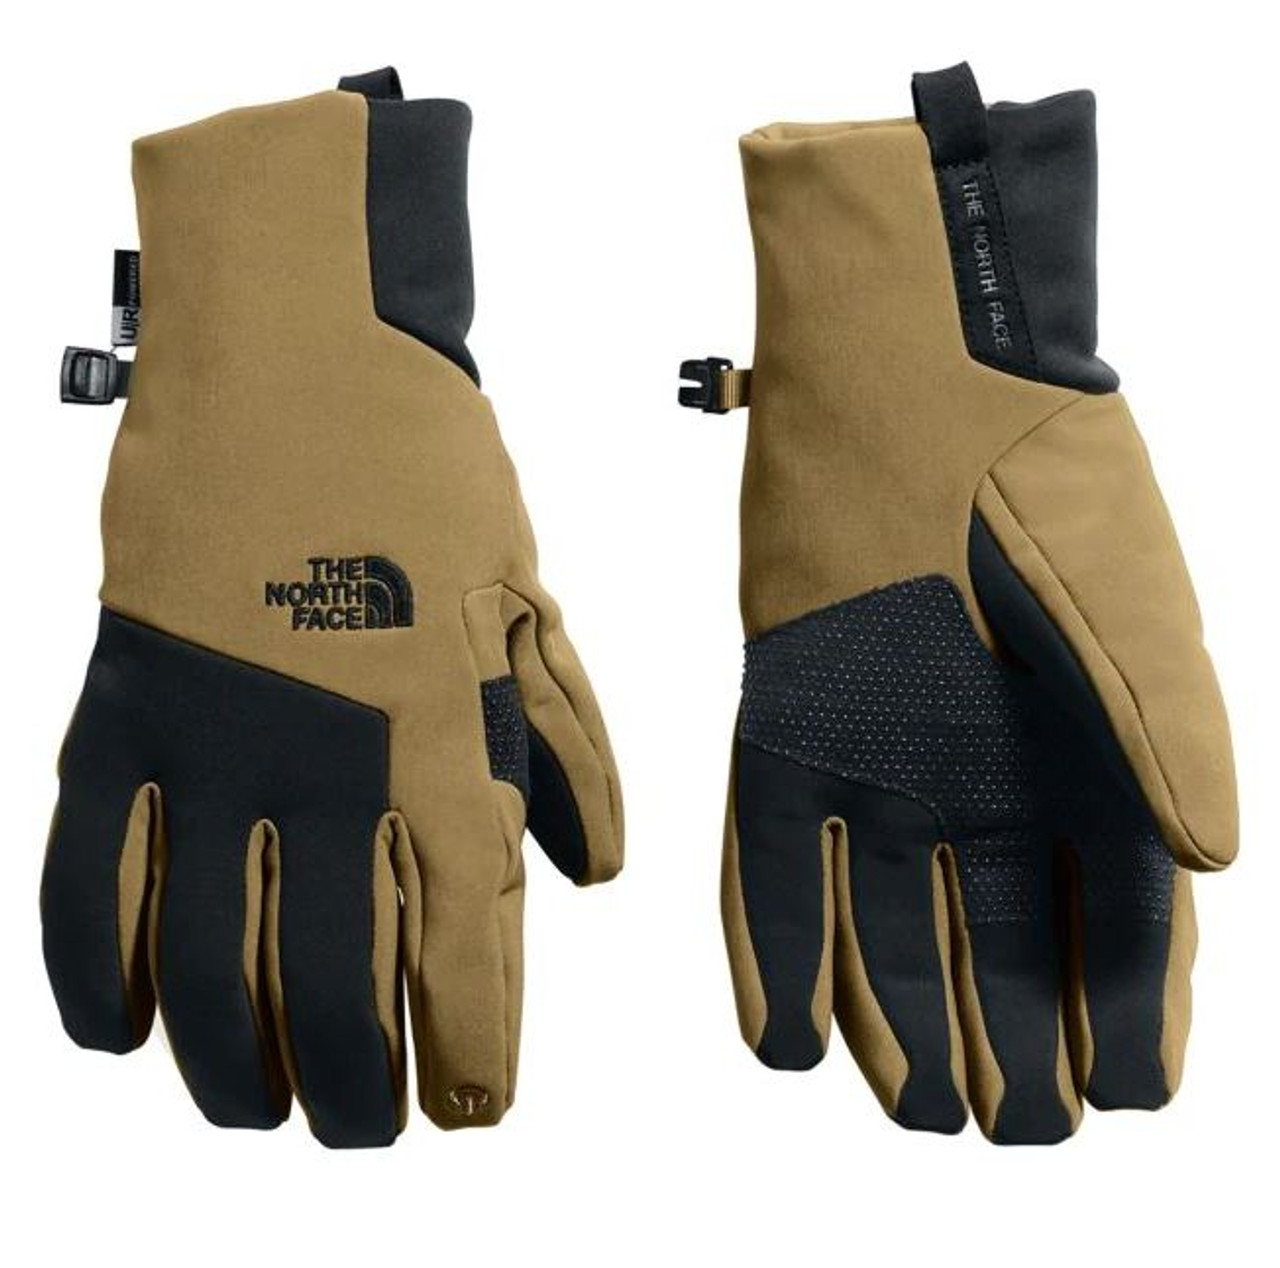 north face apex gloves review